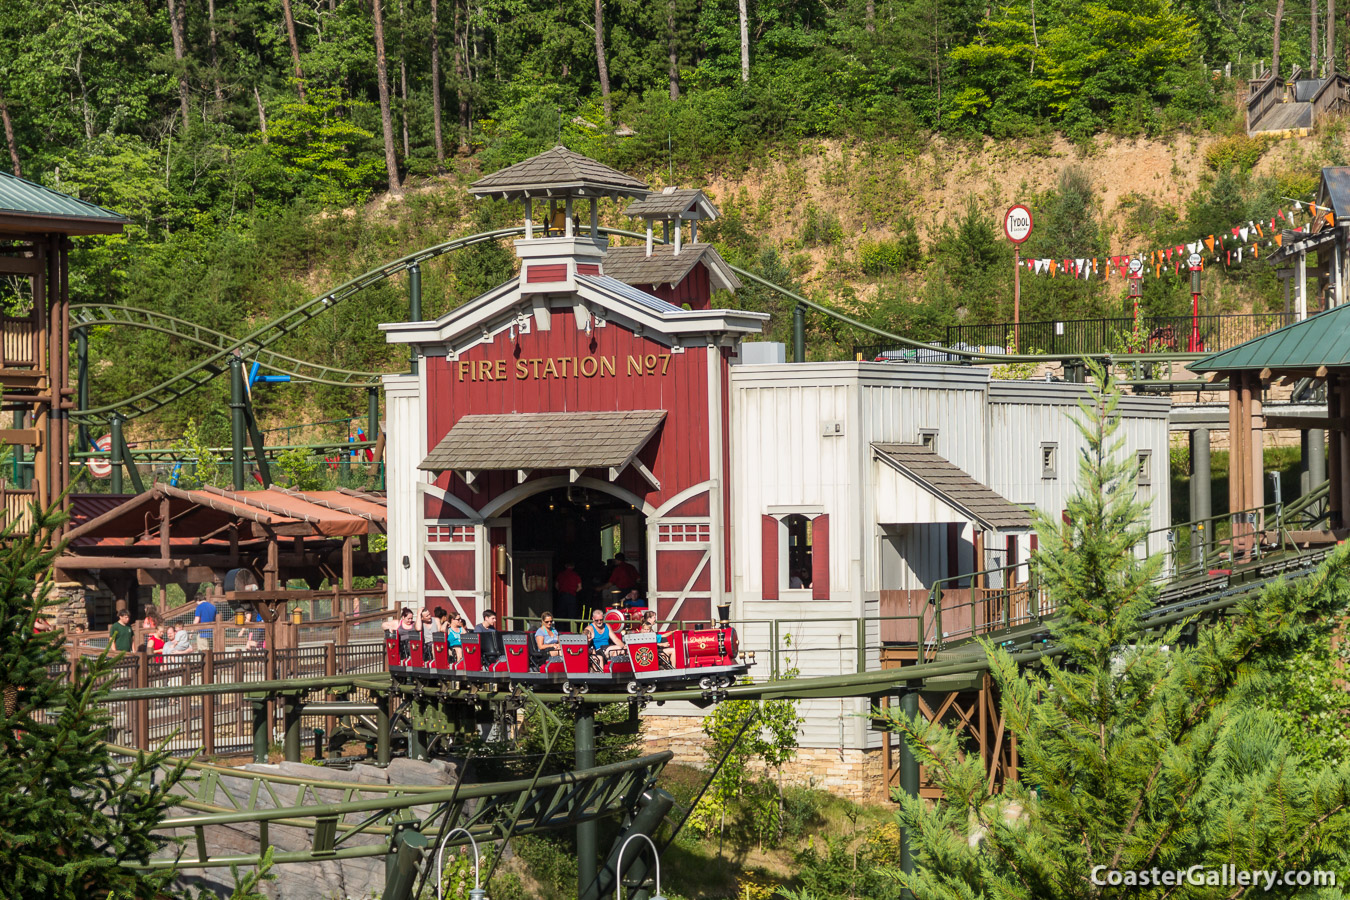 Two ride fire truck trains on the FireChaser Express roller coaster